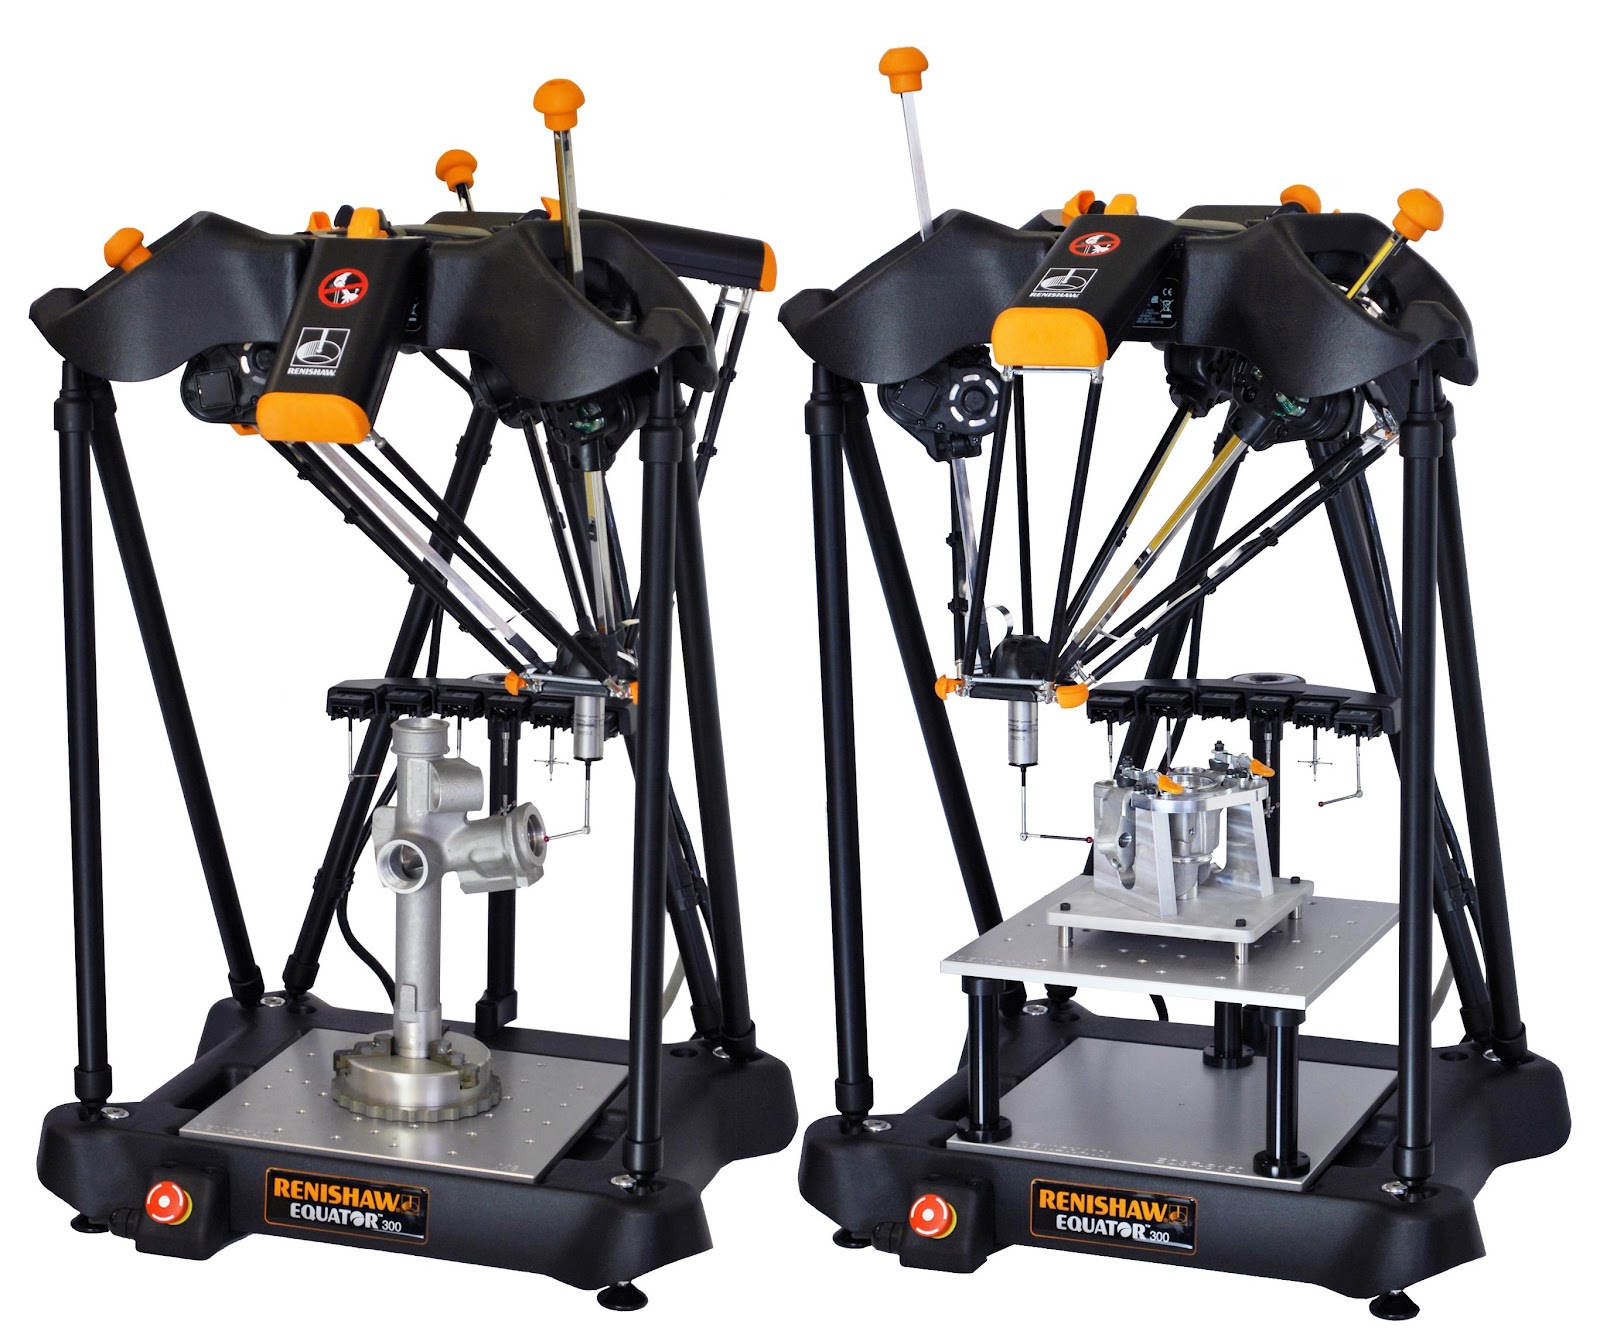 Renishaw Extended Height Equator™ 300 combination kit Programmer's version